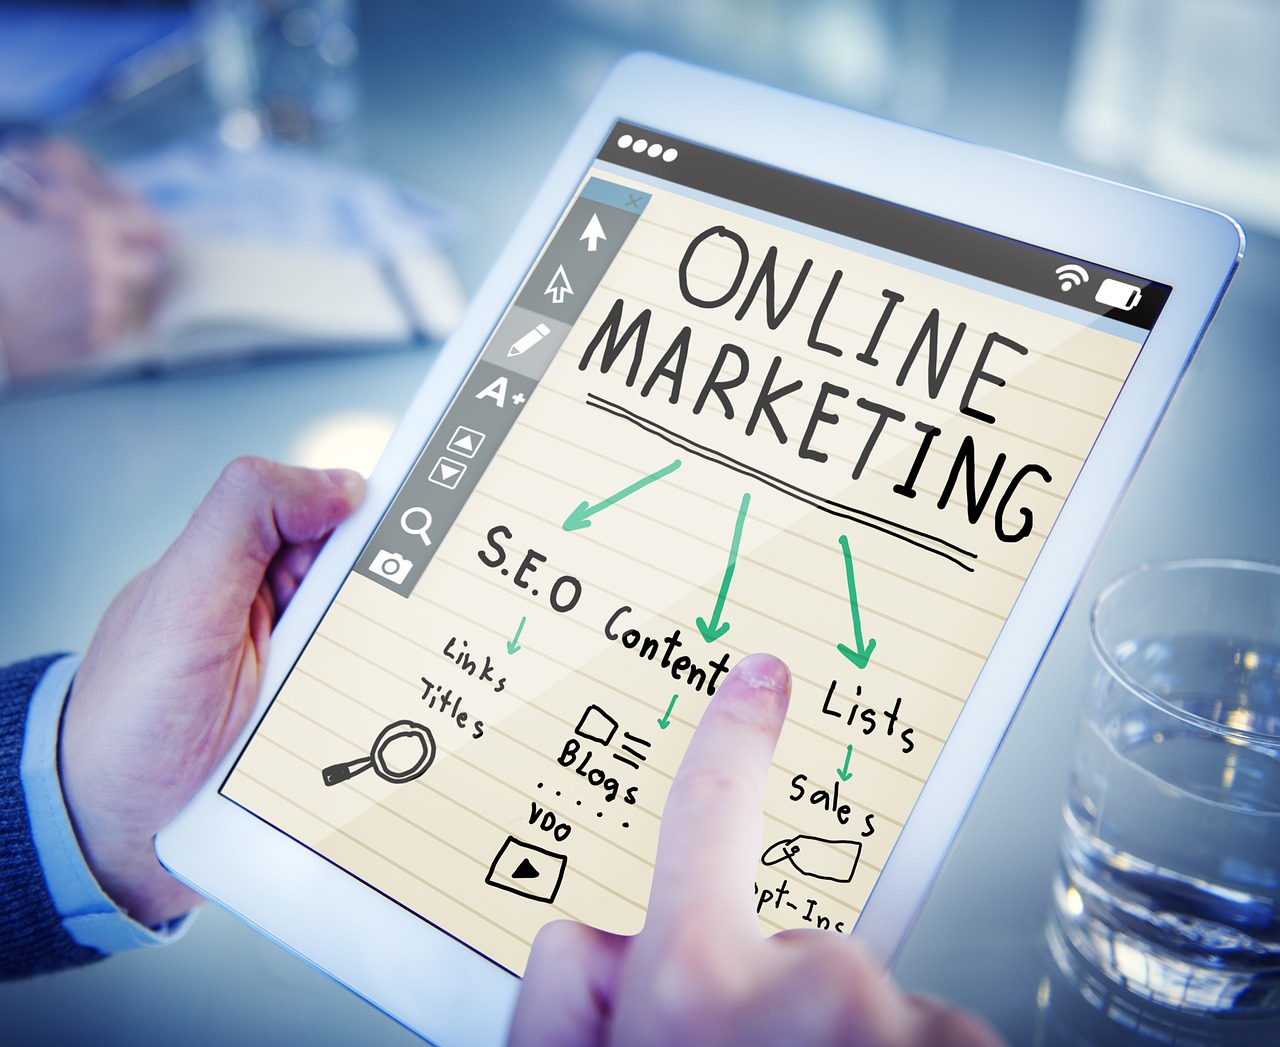 A Digital Marketing Agency can handle all your online promotion needs